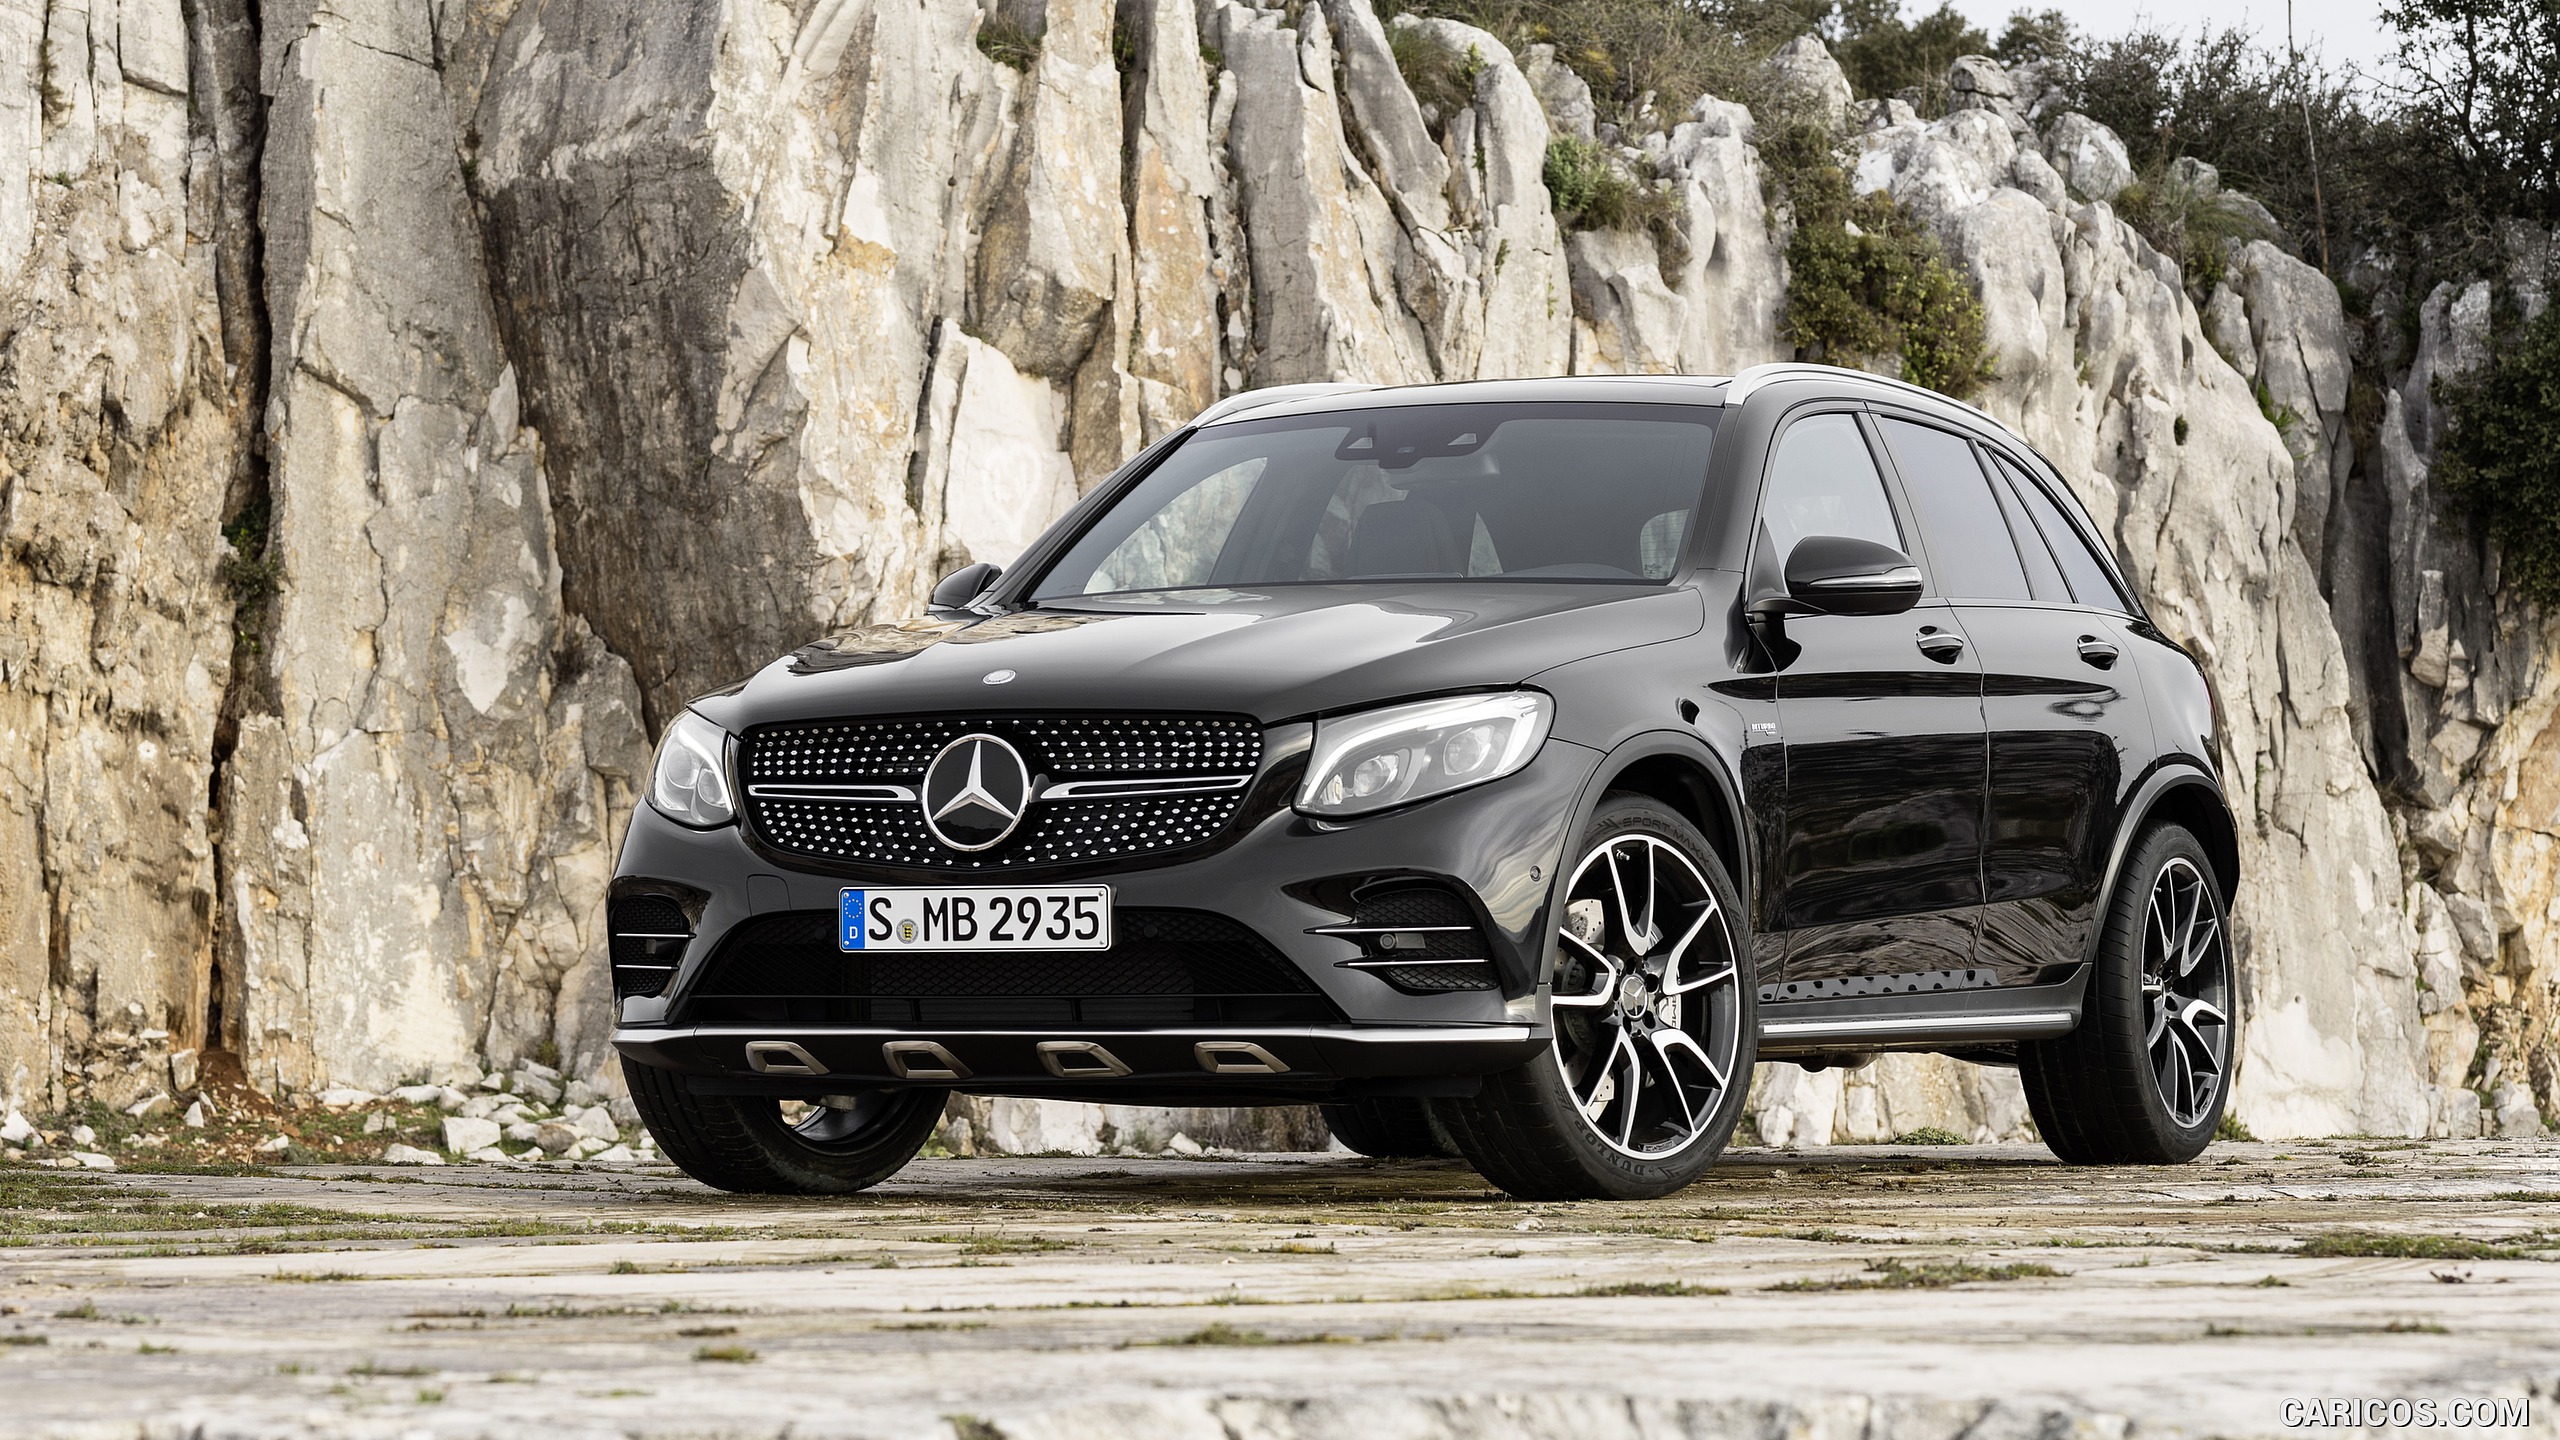 2017 Mercedes-AMG GLC 43 4MATIC (Chassis: X253, Color: Obsidian Black) - Front, #18 of 108